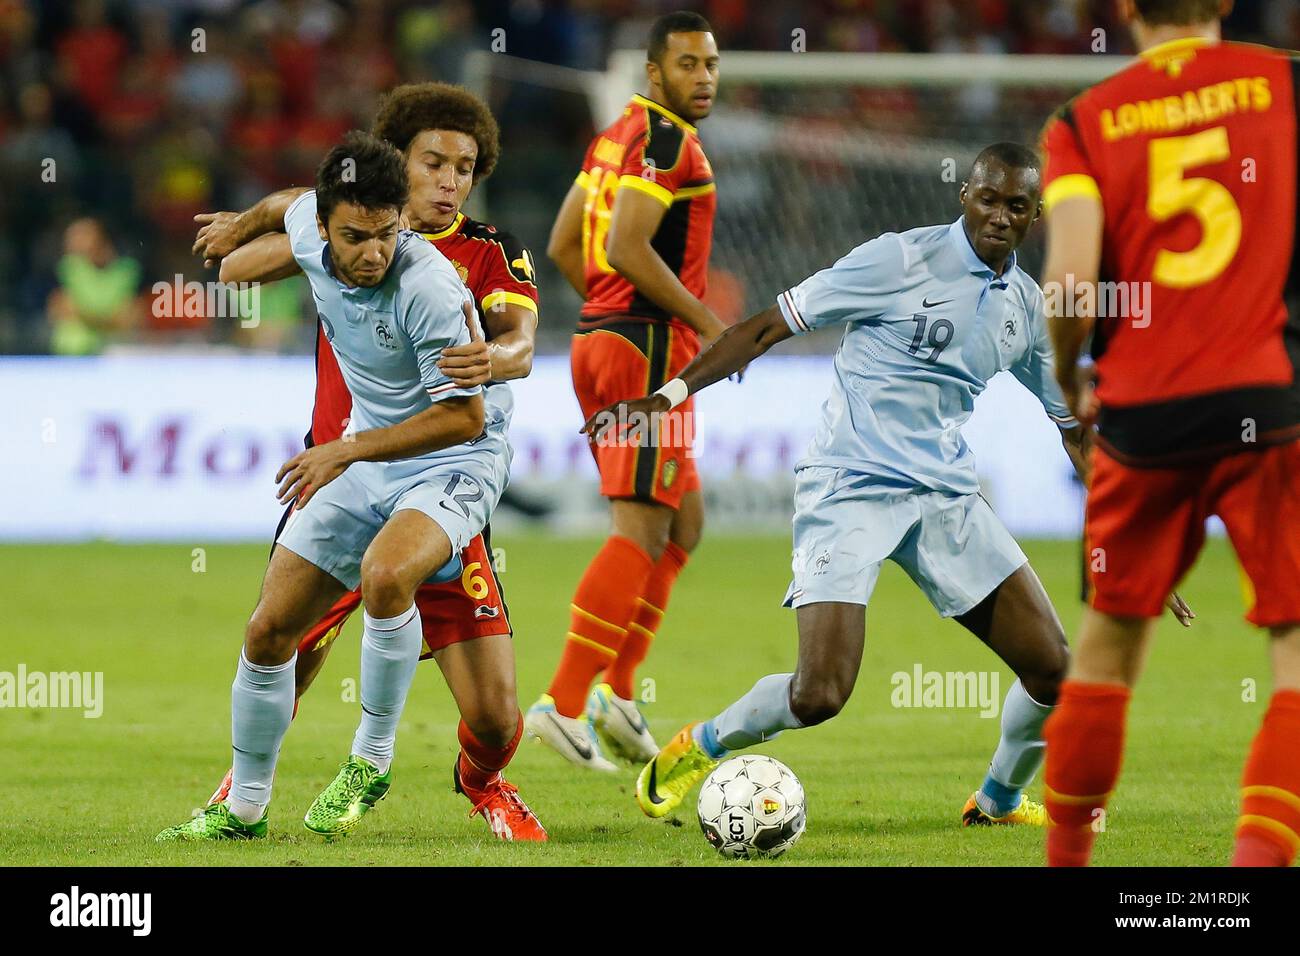 French Clement Grenier and Belgium's Axel Witsel fight for the ball during a friendly game of the Belgian national soccer team Red Devils against France's national soccer team, Wednesday 14 August 2013, in the King Baudouin Stadium (Stade Roi Baudouin/Koning Boudewijnstadion), in Brussels.  Stock Photo